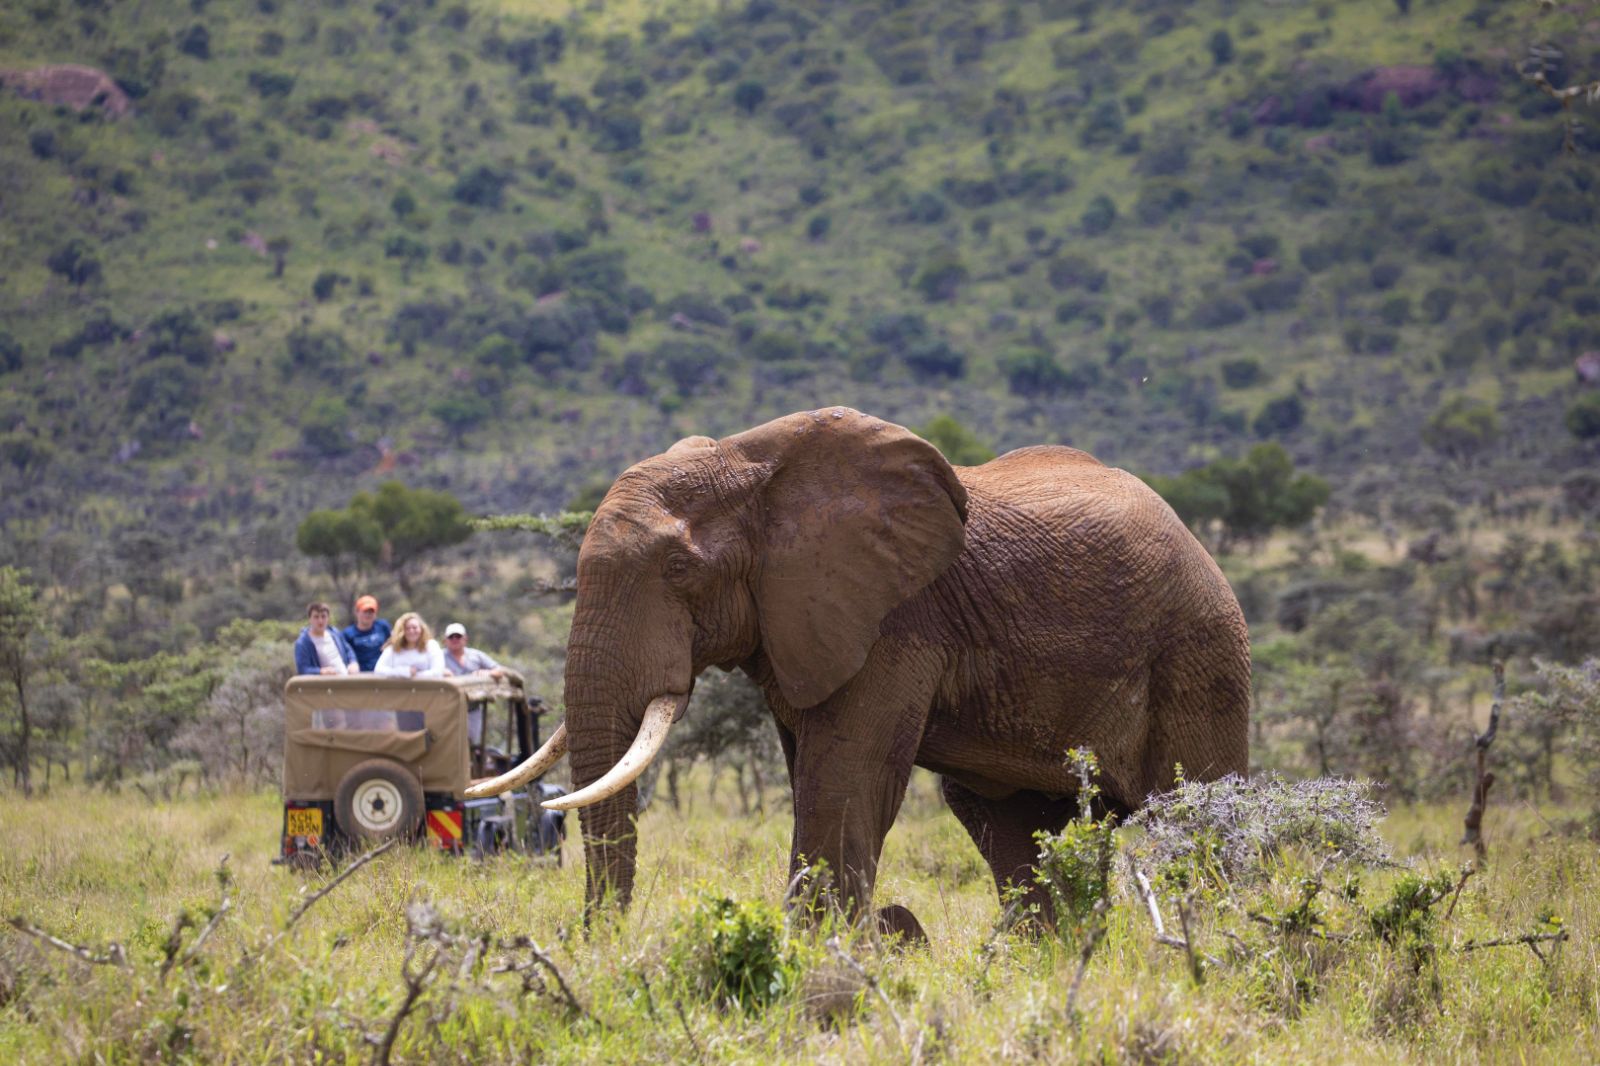 An elephant spotted on the grounds of Enasoit private house on the Laikipia Plateau in kenya